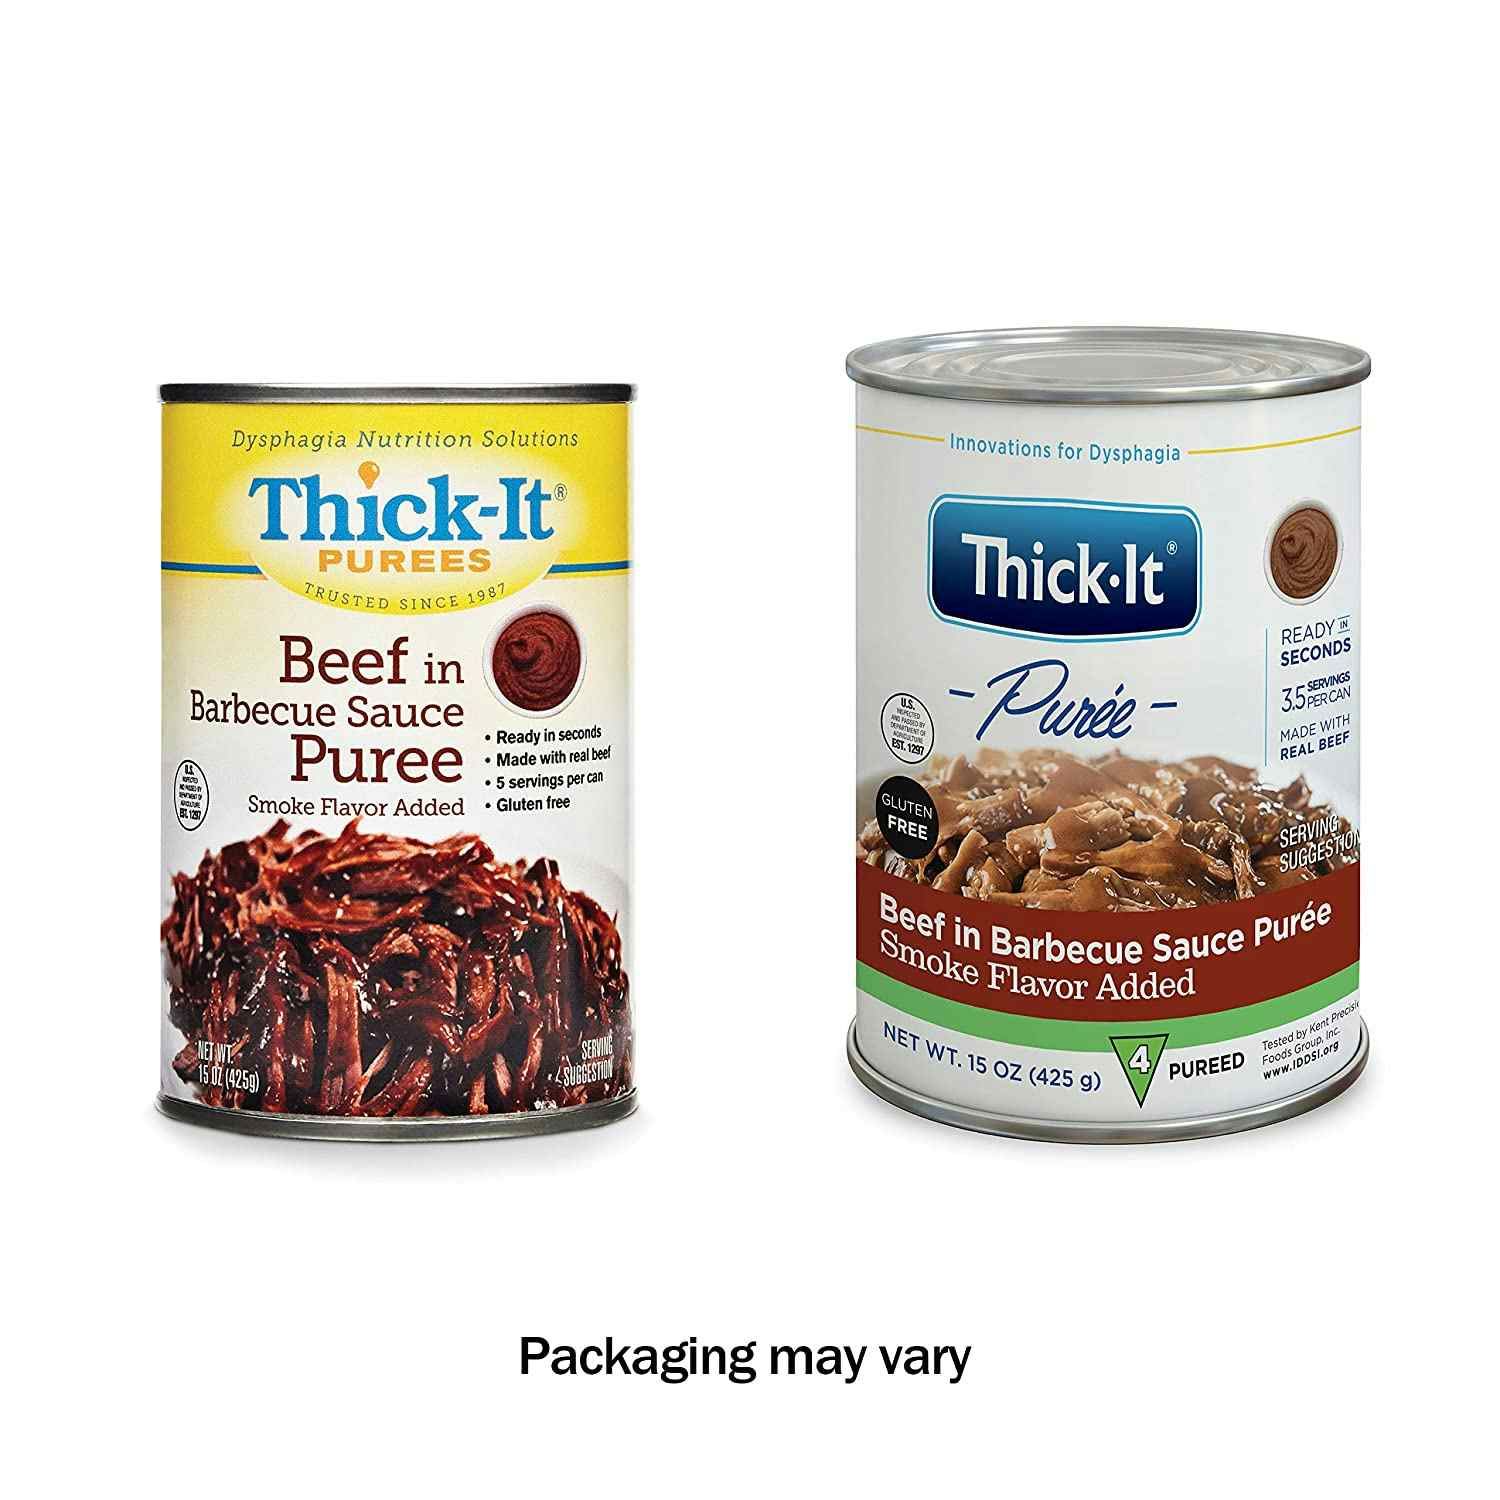 Thick-It Purees Beef in BBQ Sauce Puree, 15 oz., H309-F8800, 1 Each, Comparison